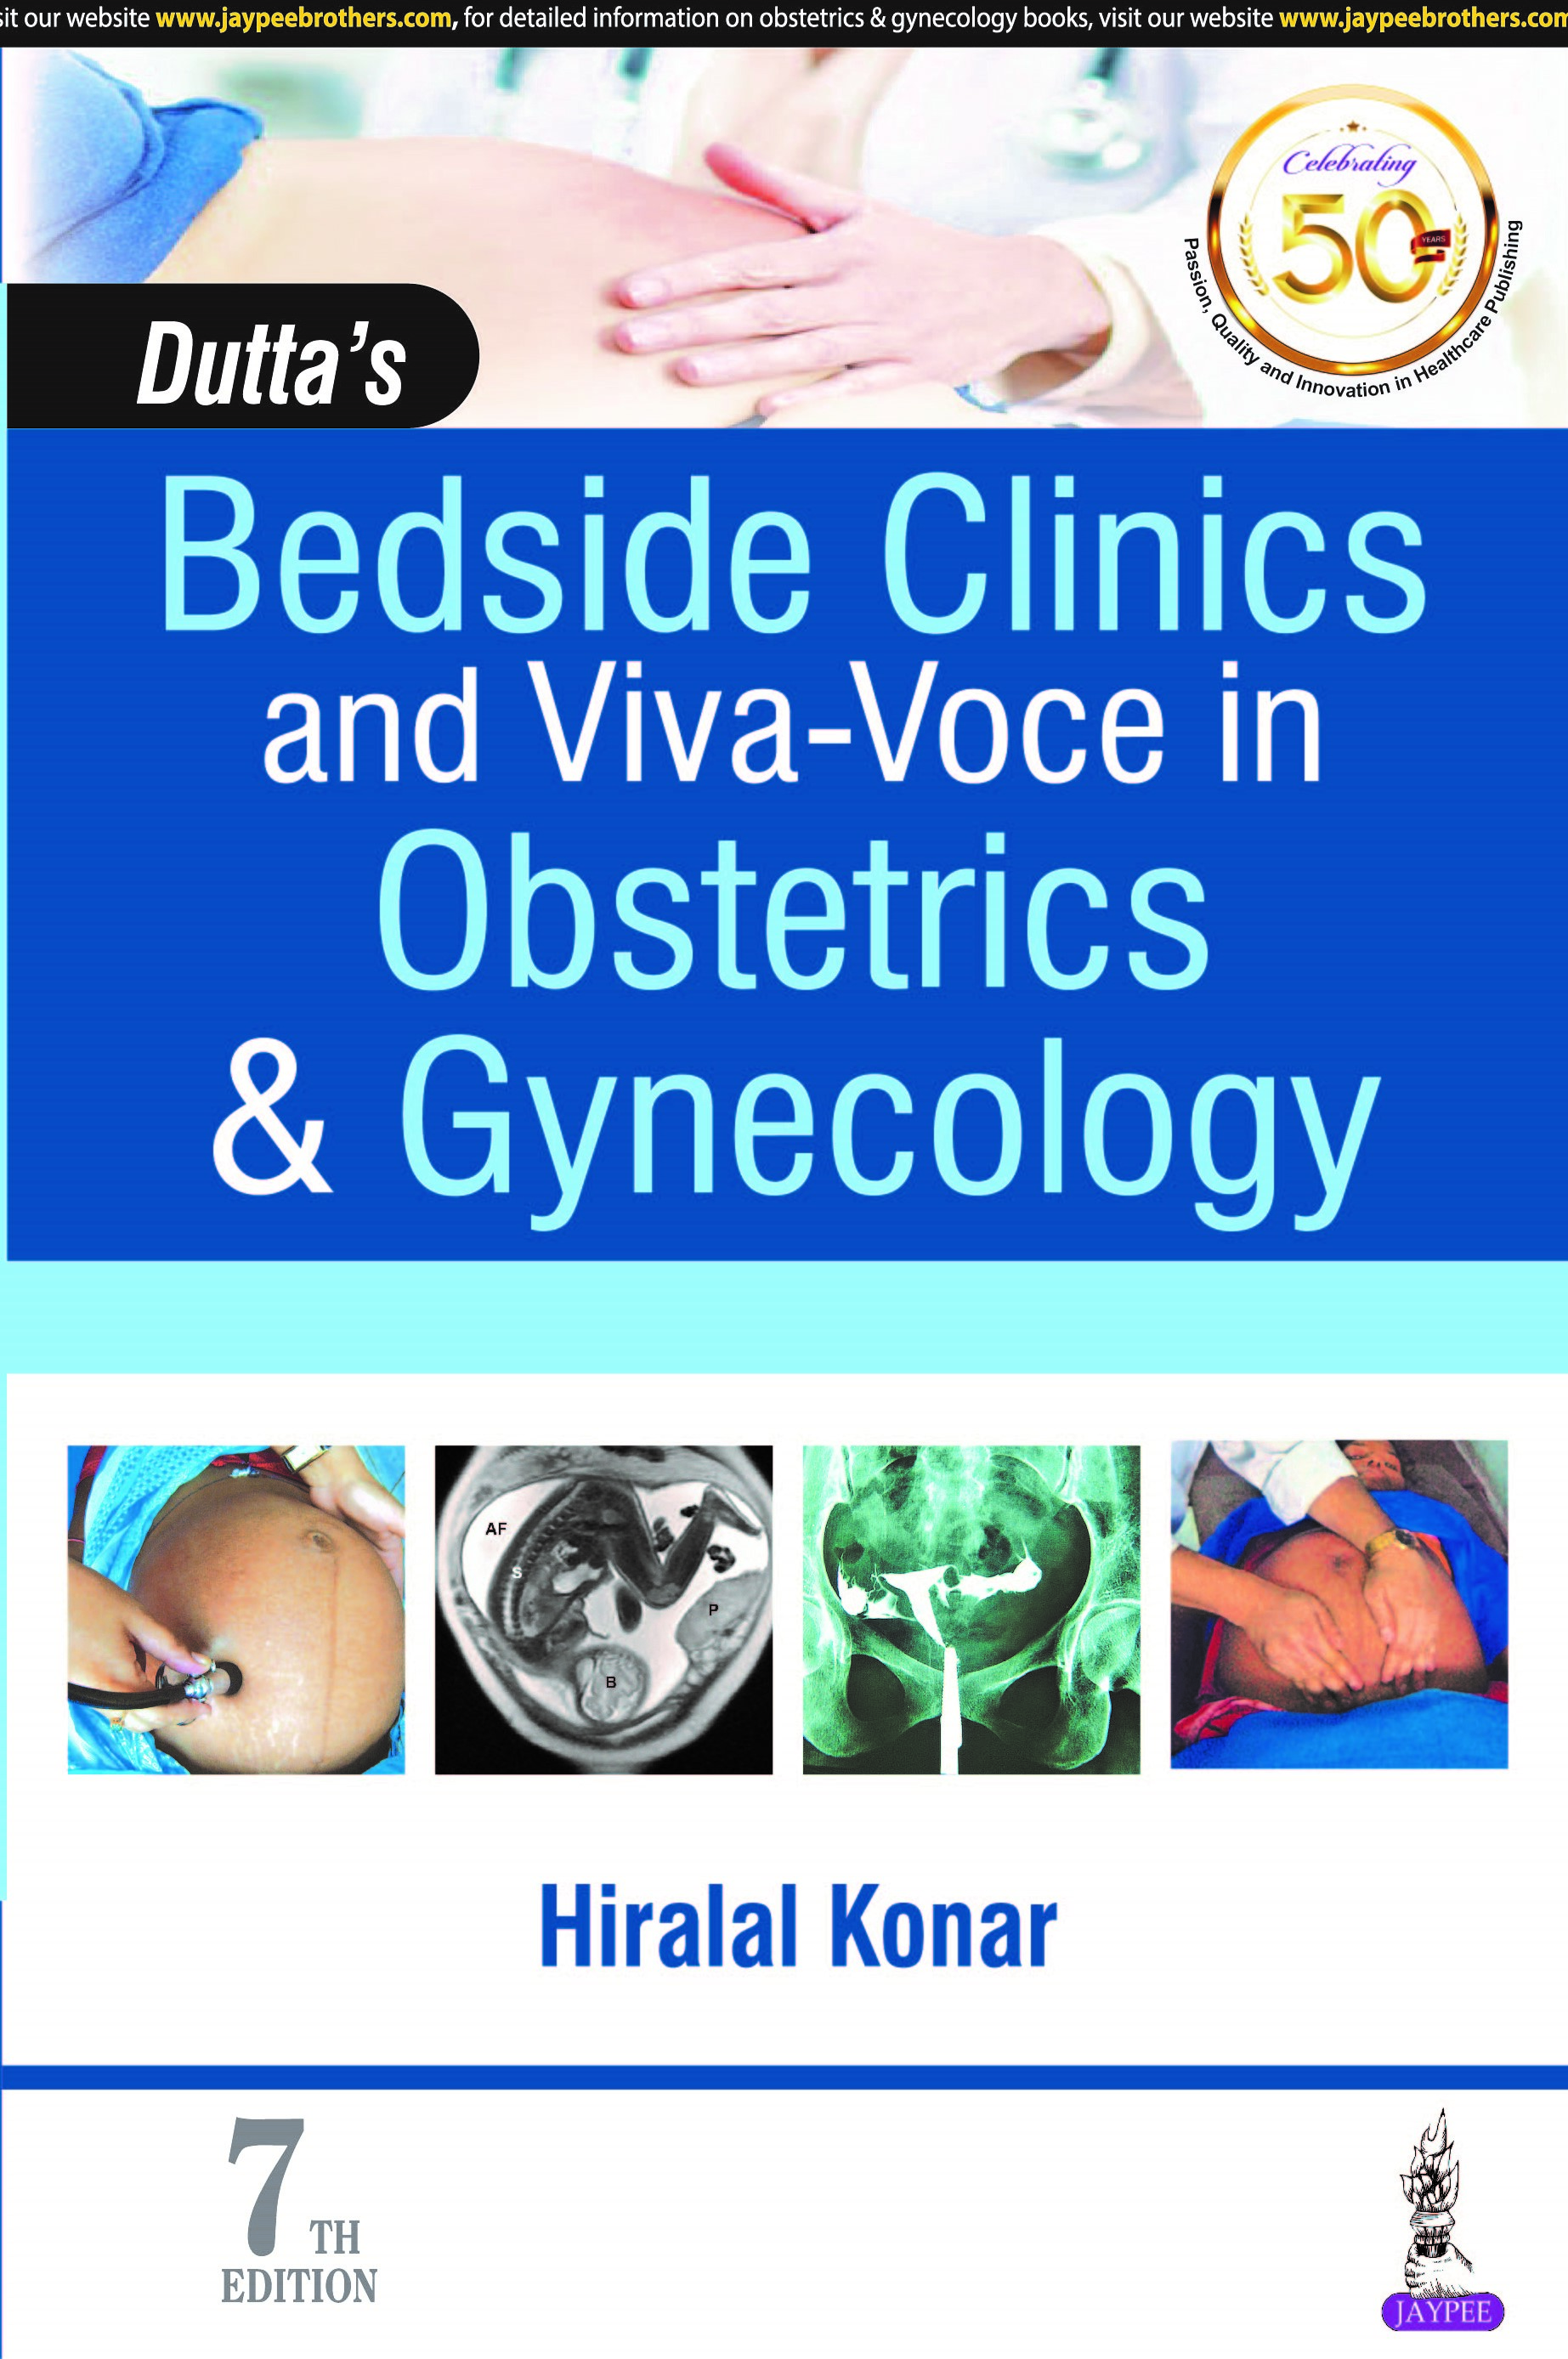 Dutta's Bedside Clinics and Viva-Voce in Obstetrics & Gynecology